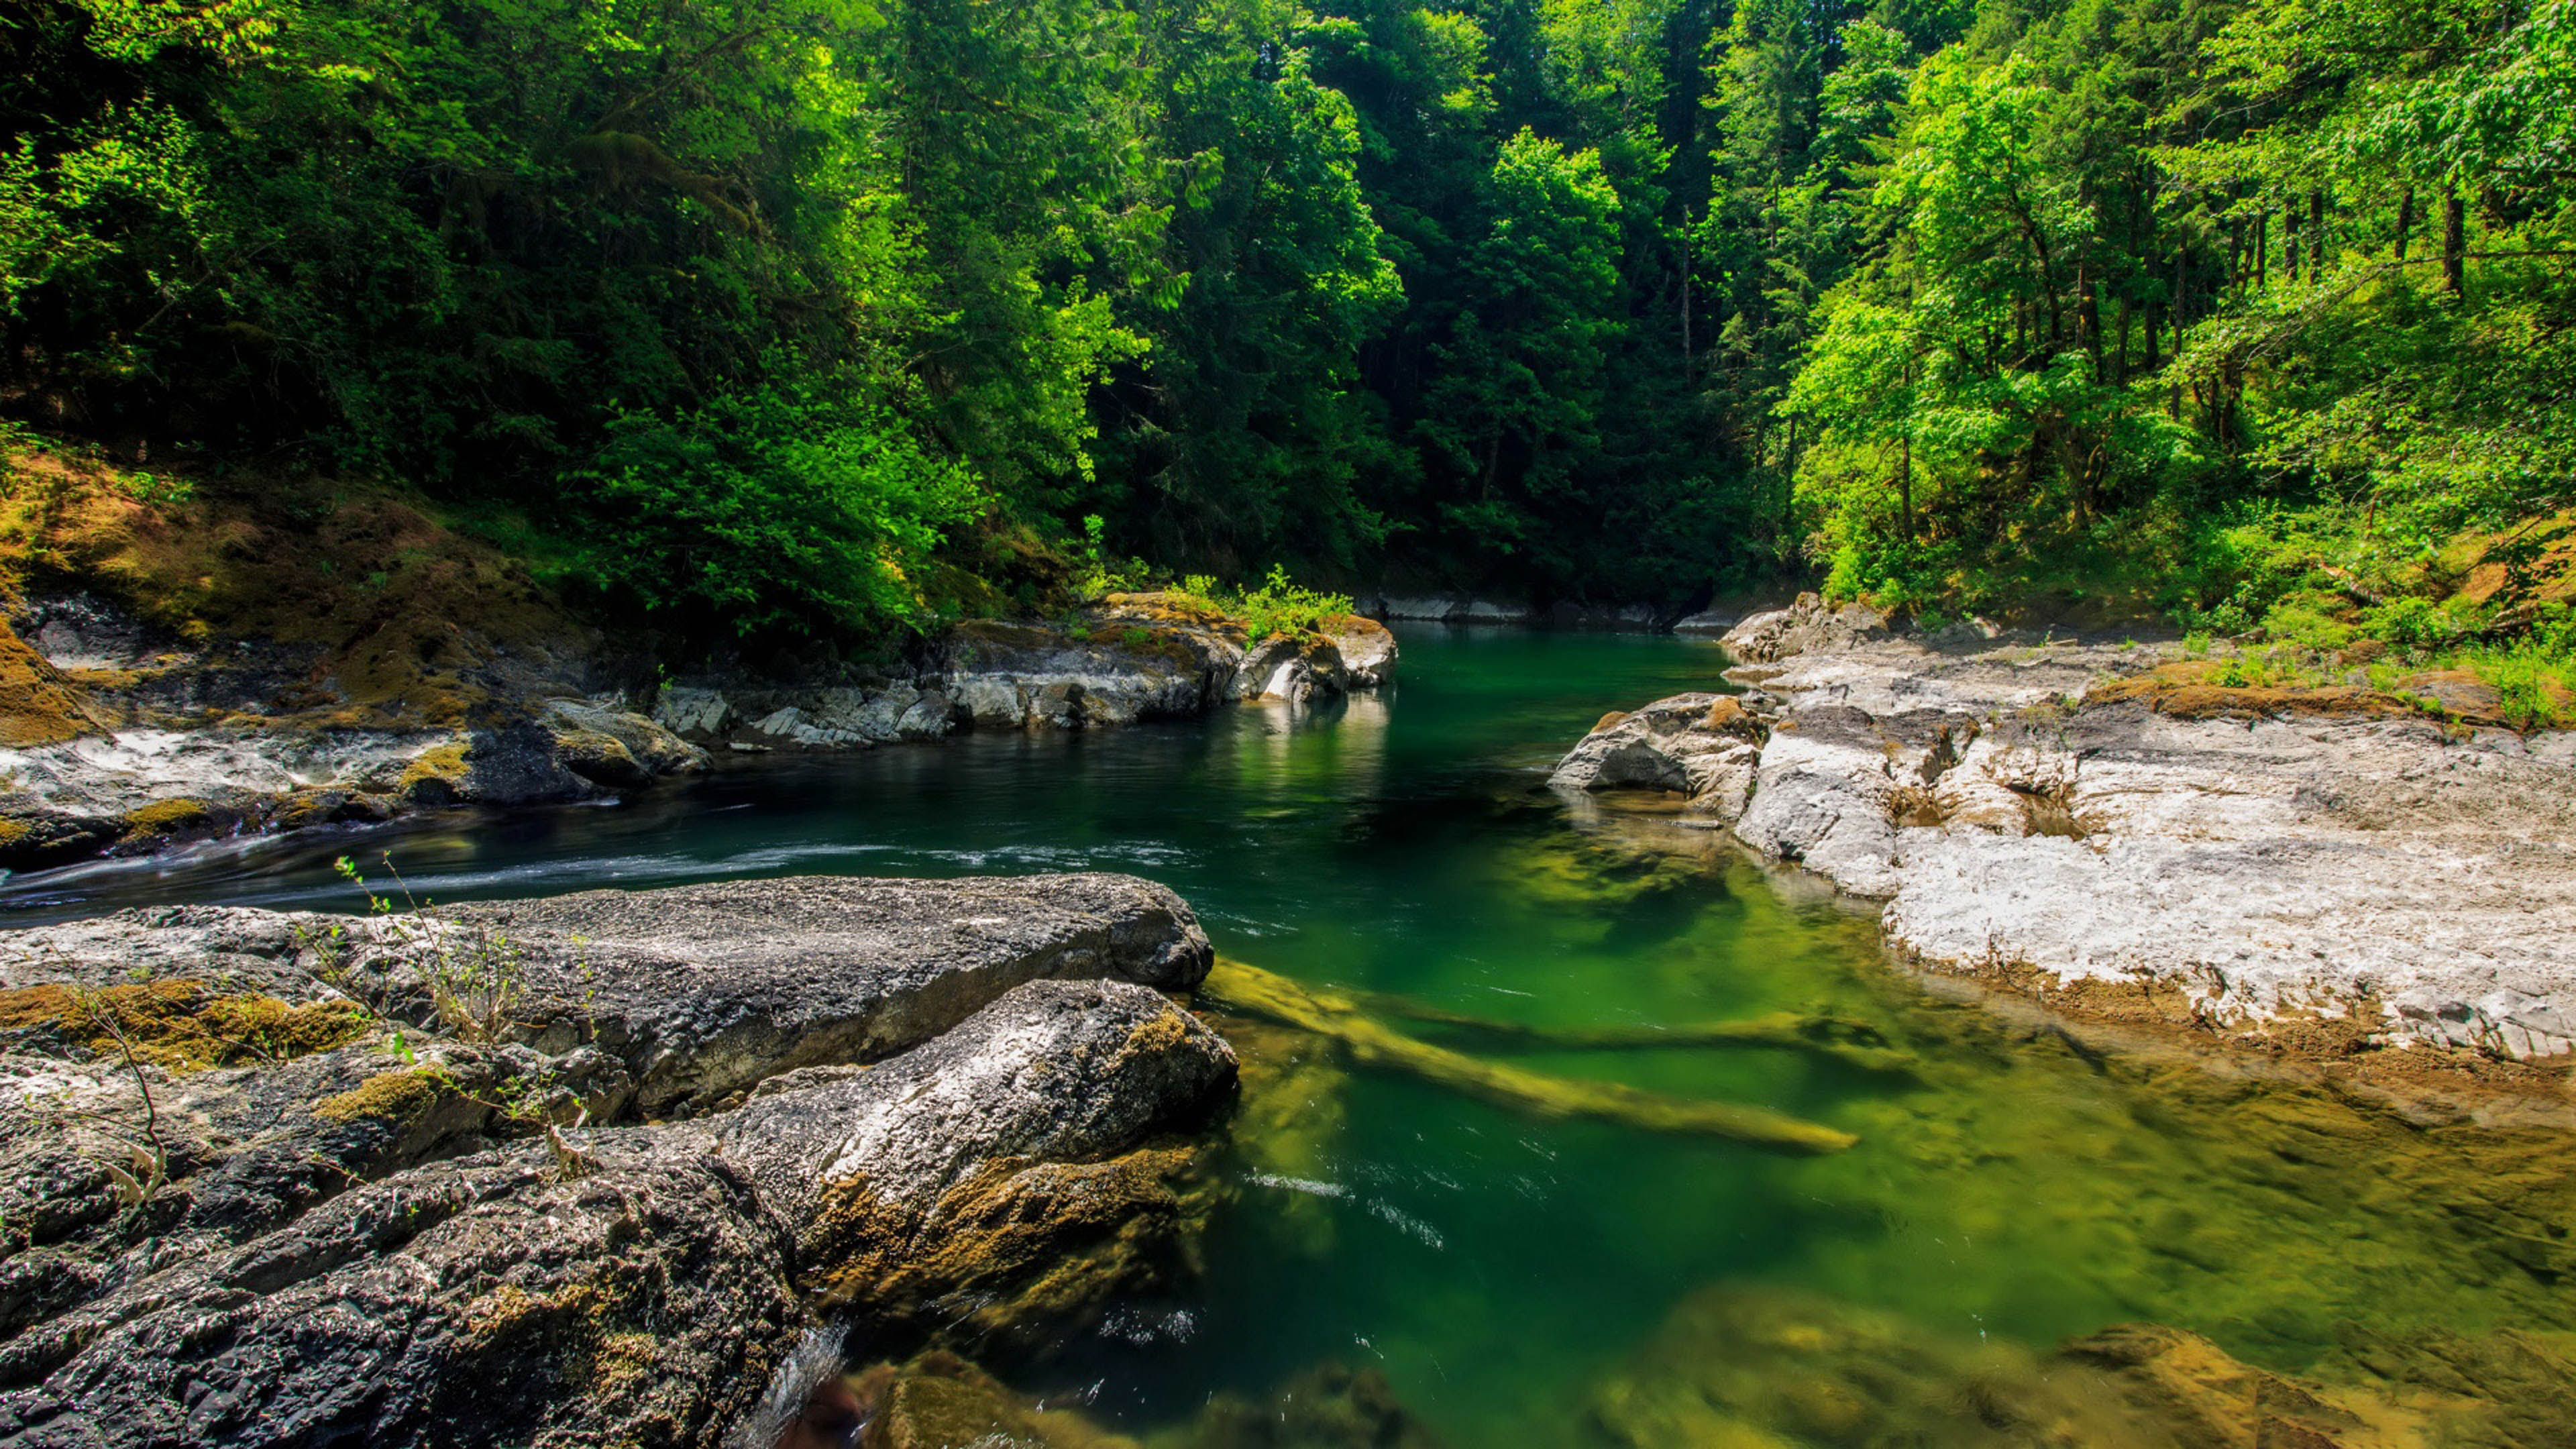 Canada Mountain River Green Water Dense Forest With Trees Rocky Coast Rocks Landscape Wallpaper HD 3840x2160, Wallpaper13.com